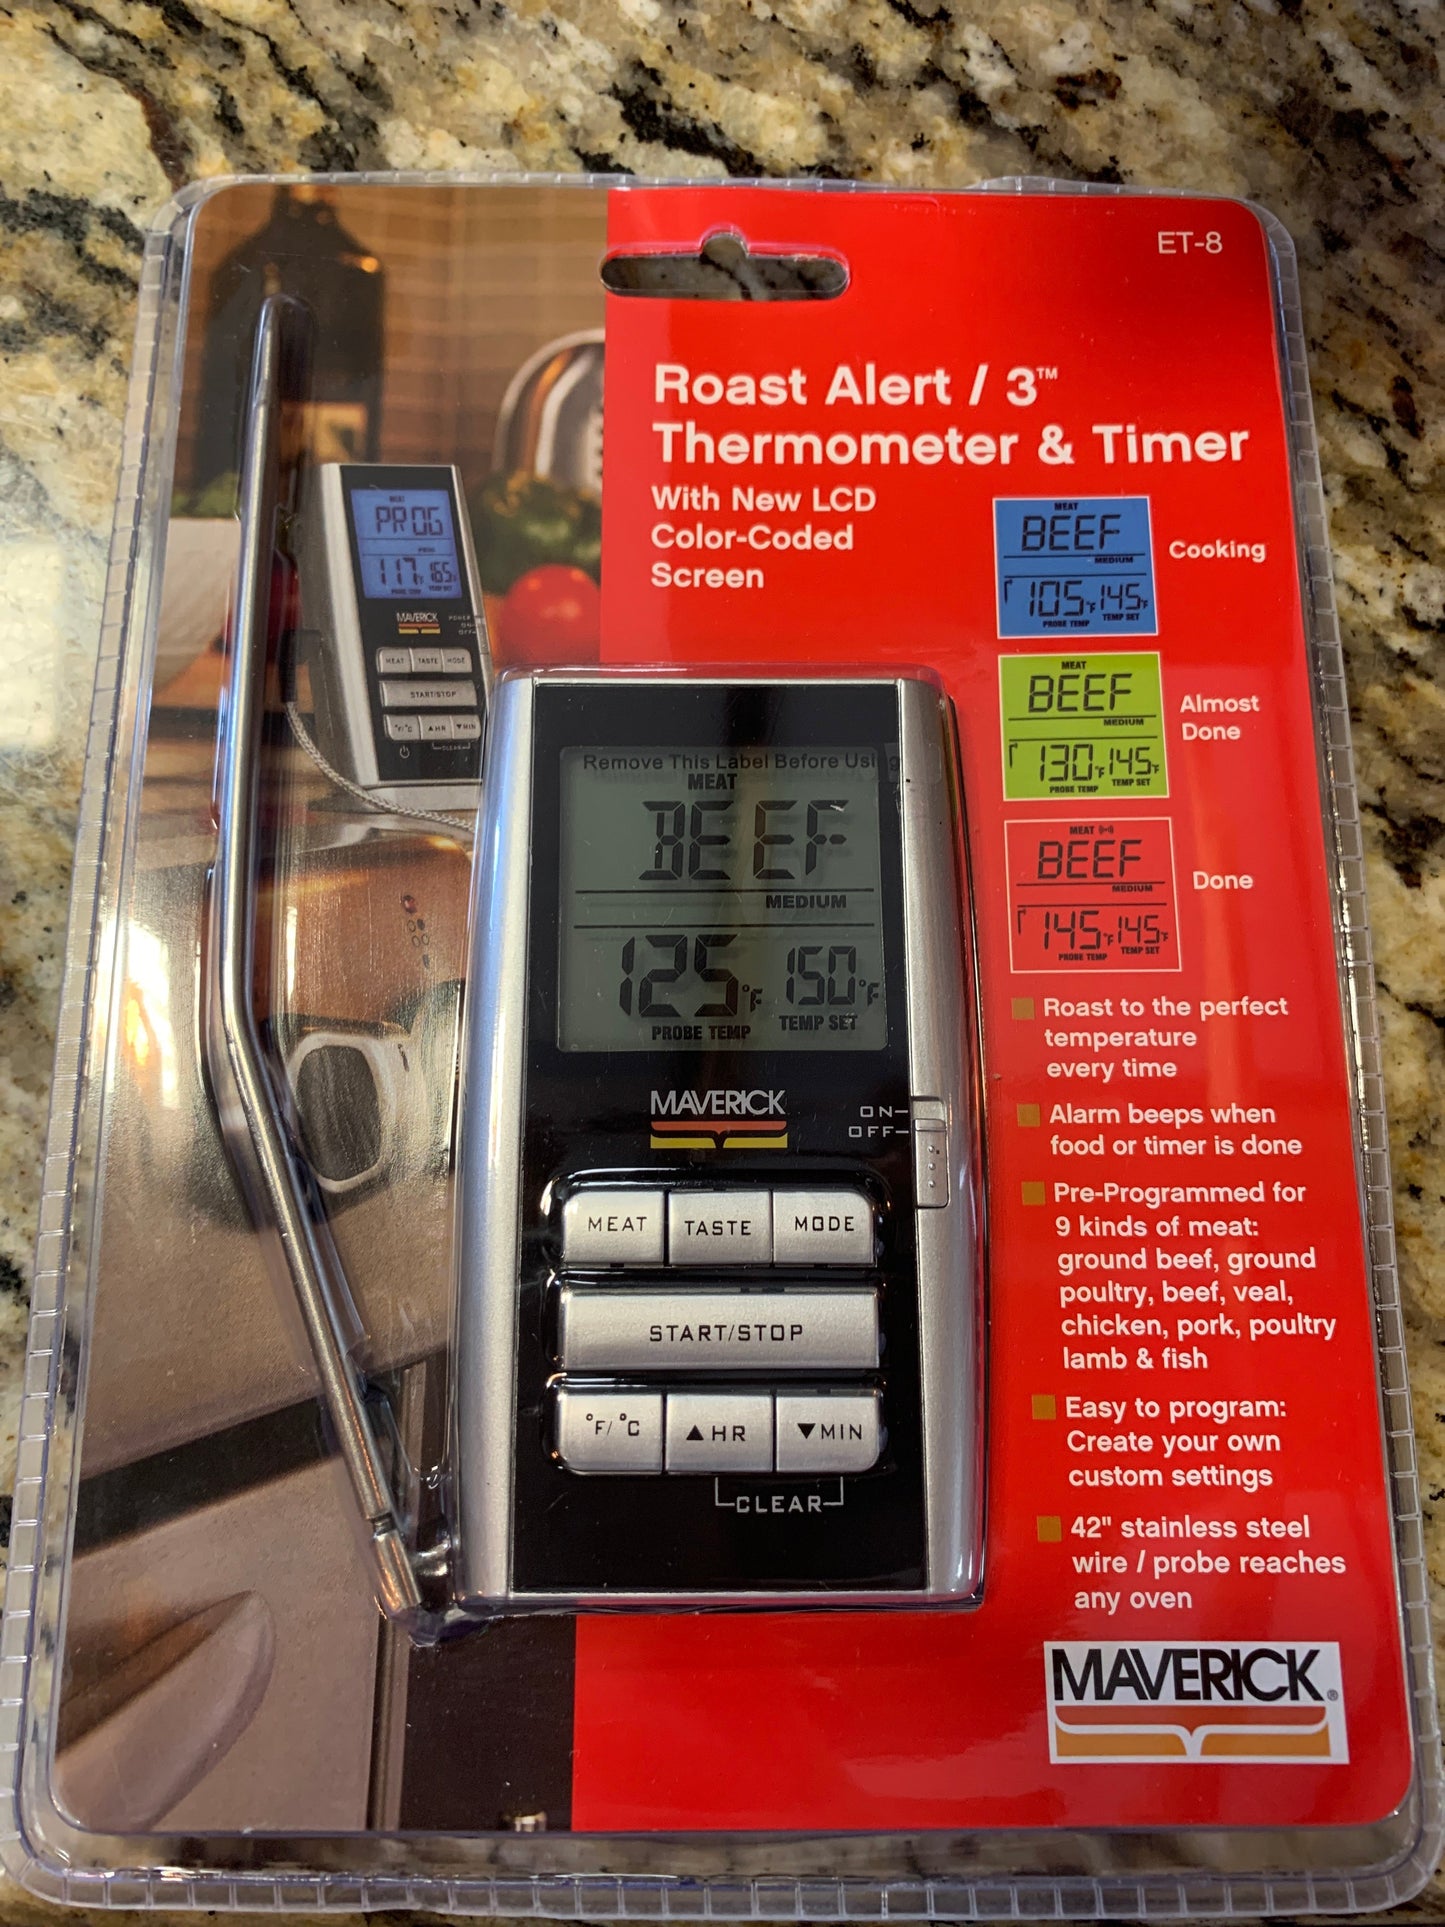 Maverick Roast Alert/3 Thermometer & Timer (w/ new LCD Color-Coded Screen) ET-8